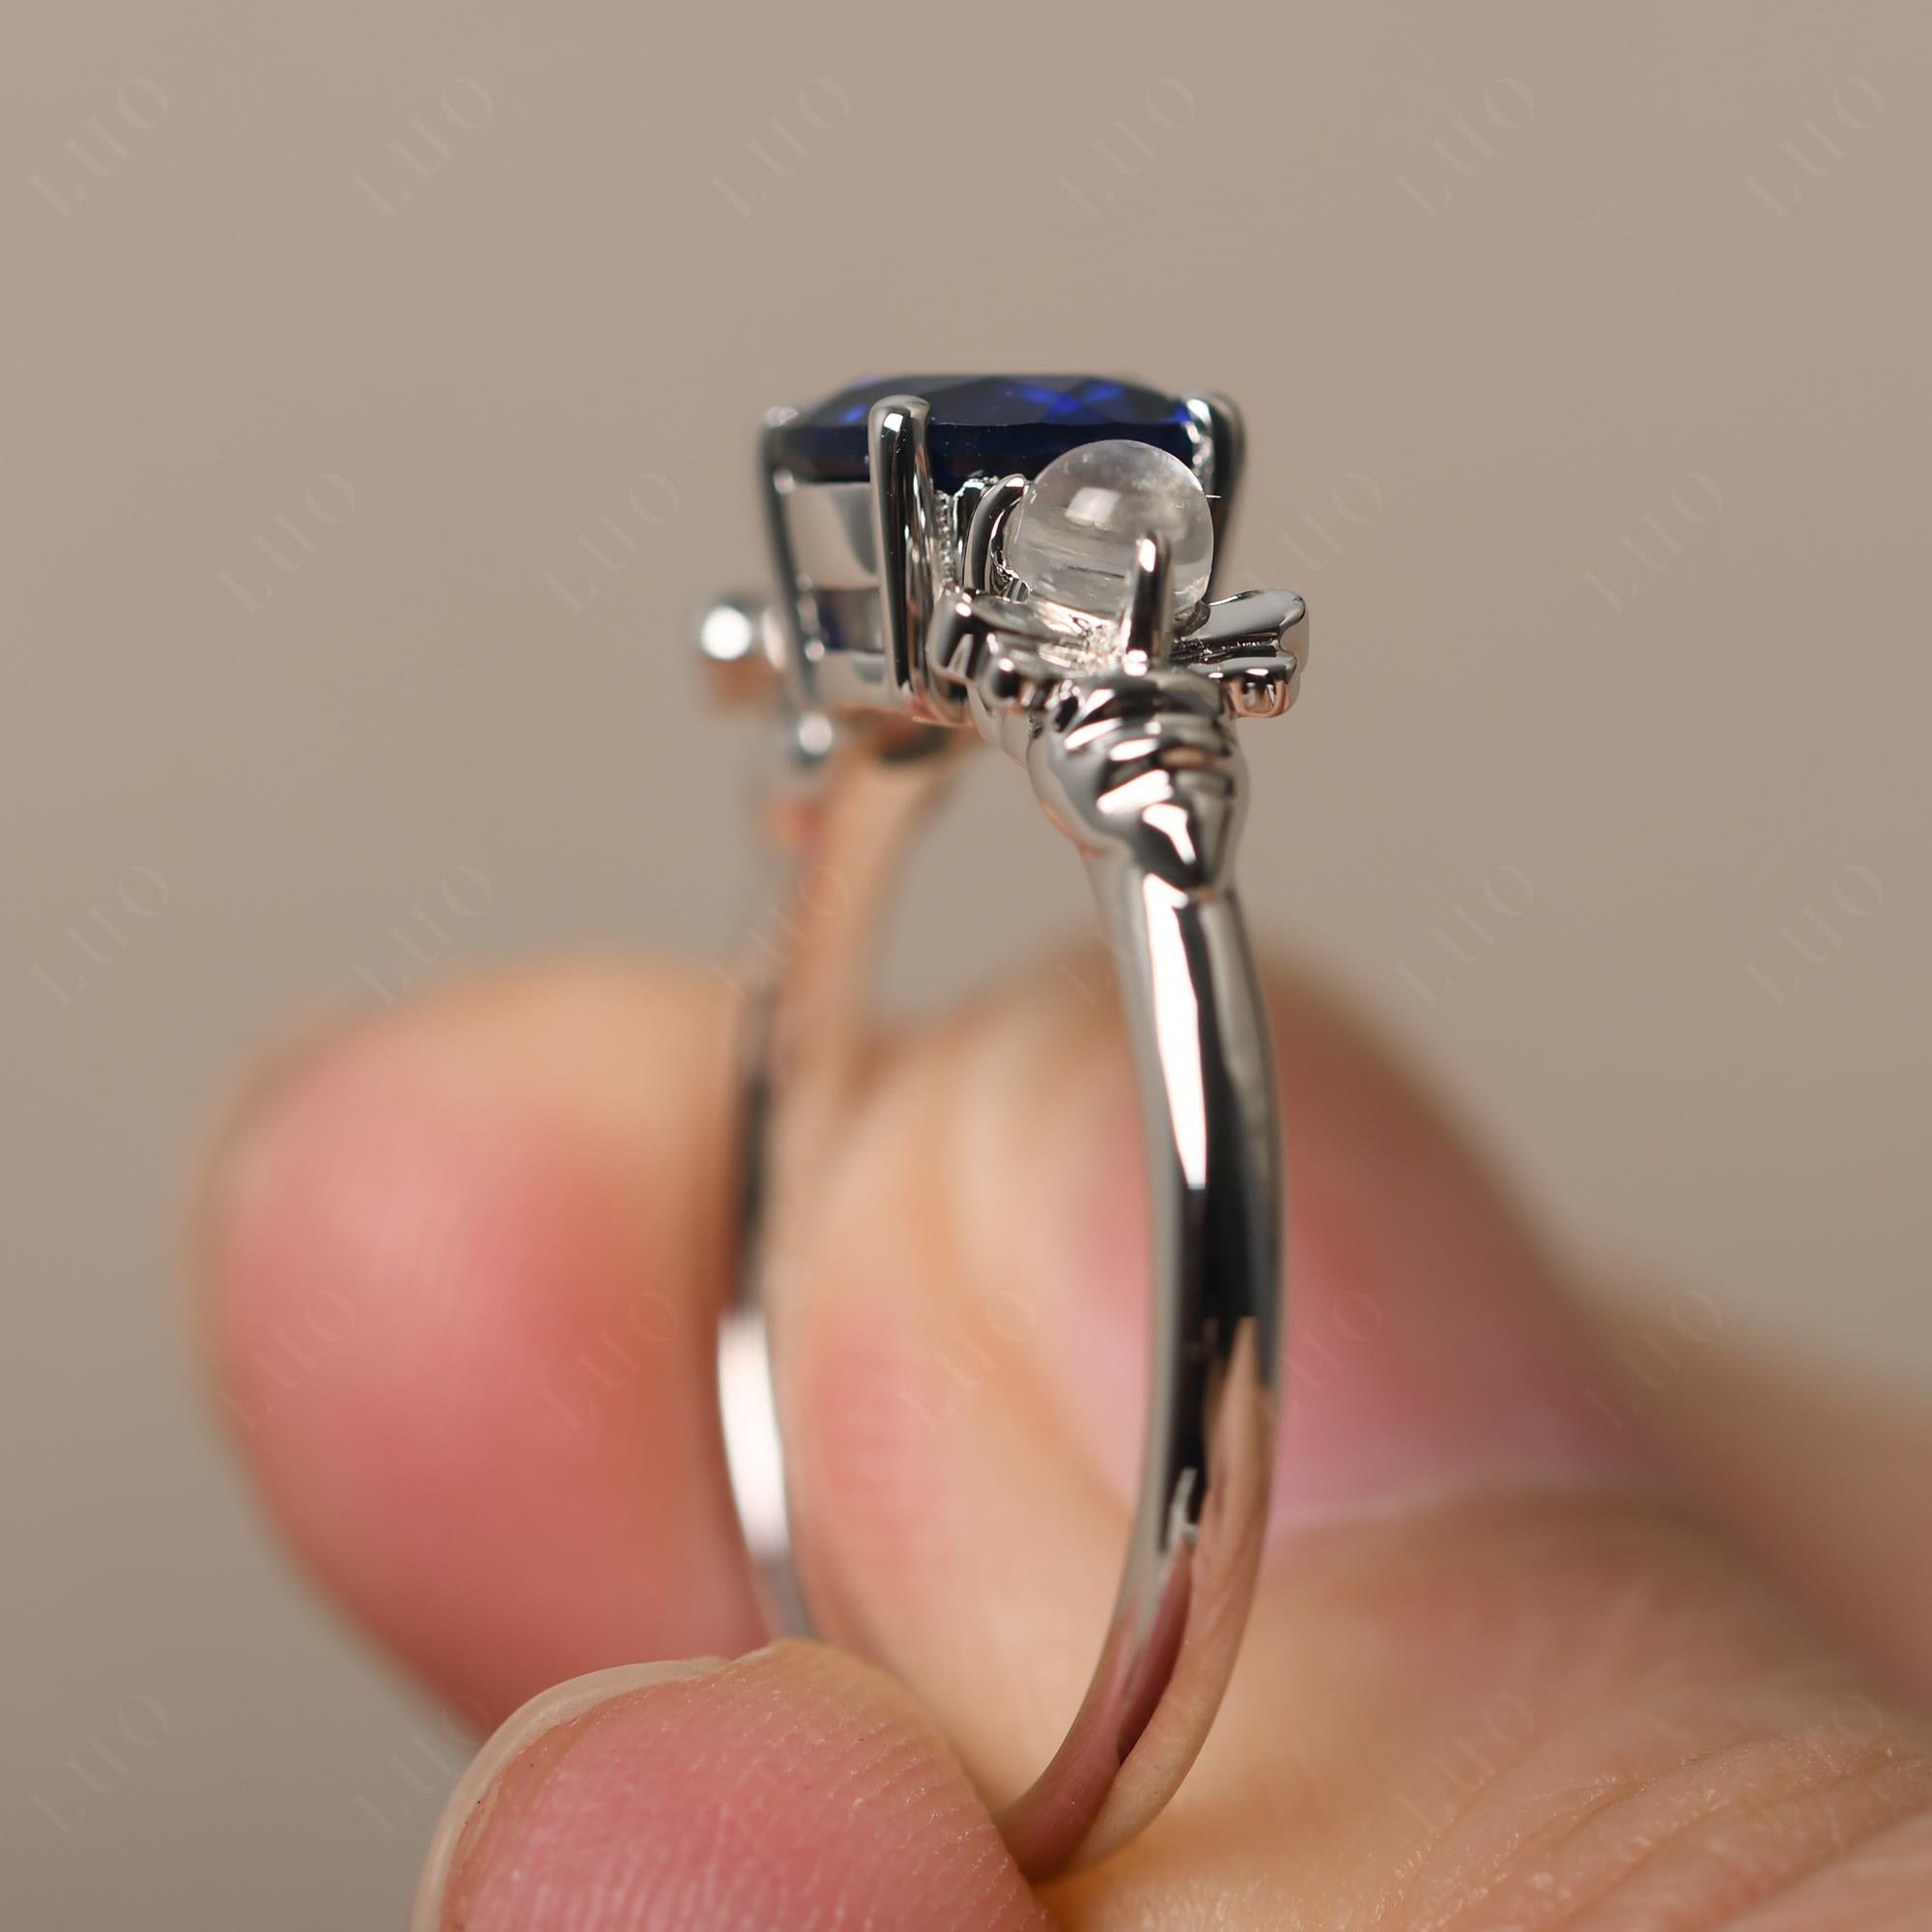 Moonstone and Sapphire Bee Ring - LUO Jewelry